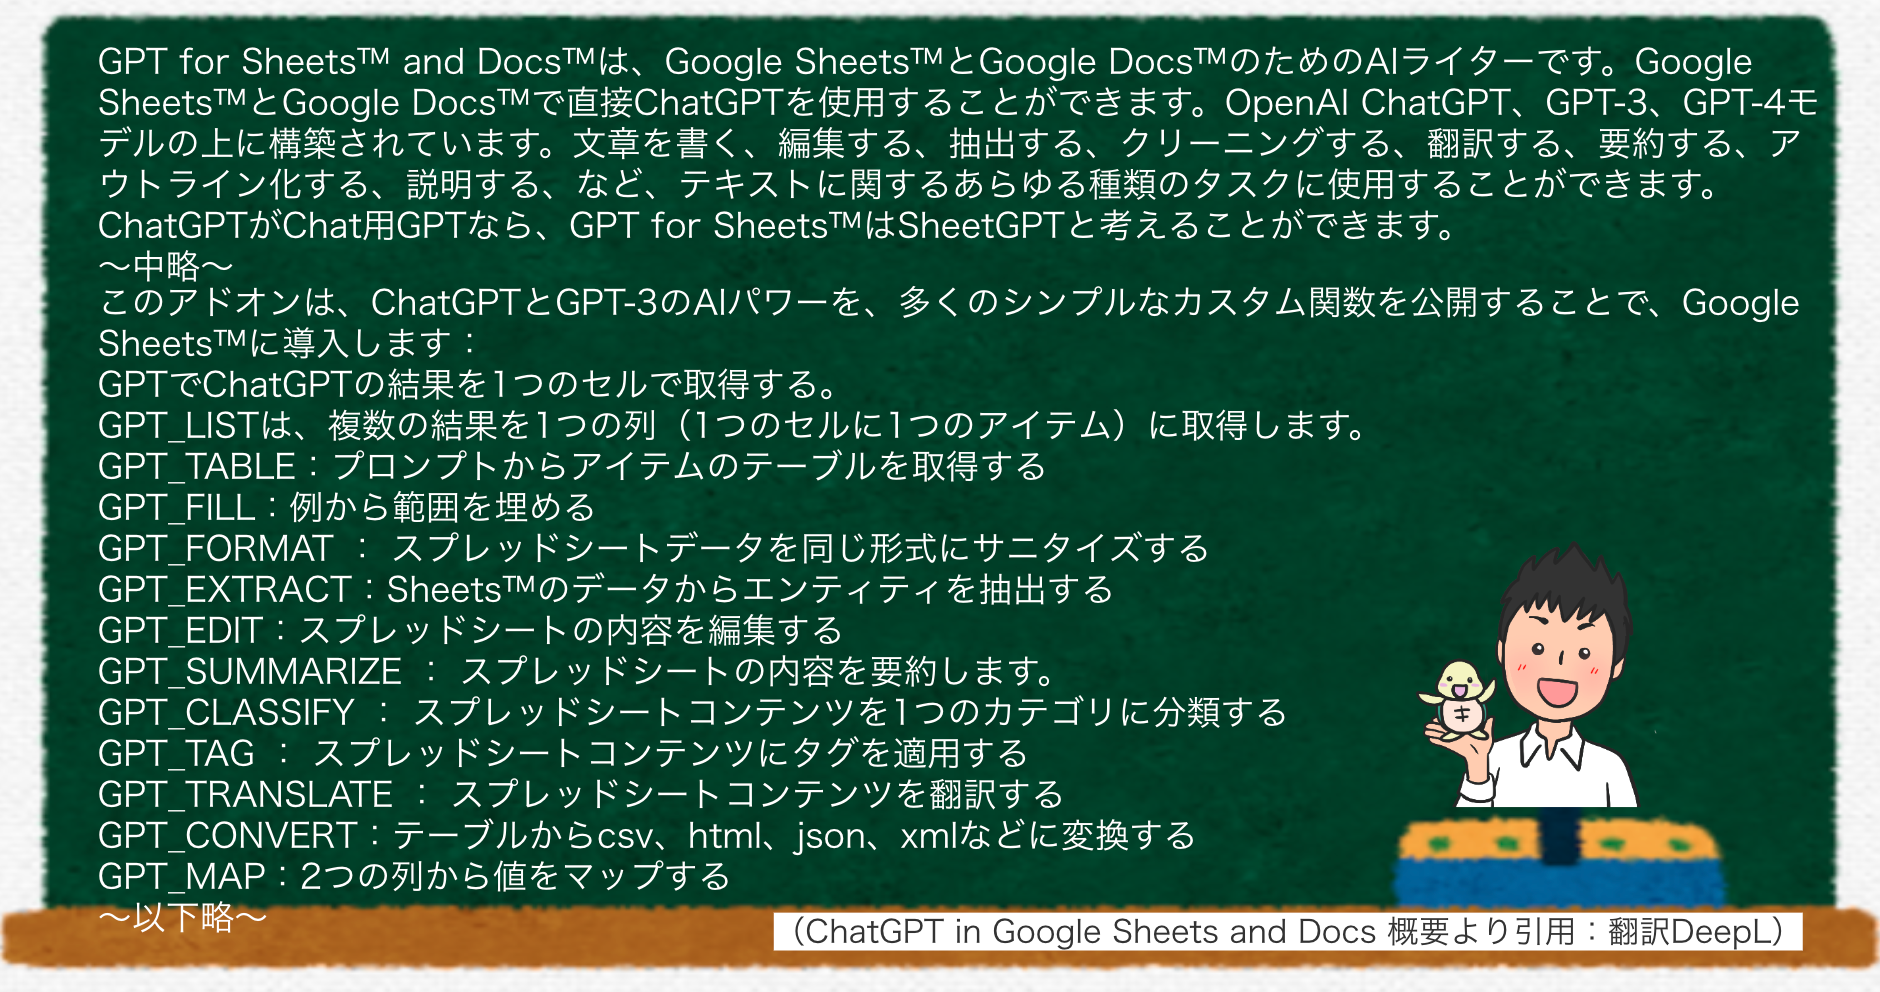 GPT for Sheets and Docsの概要欄からの抜粋